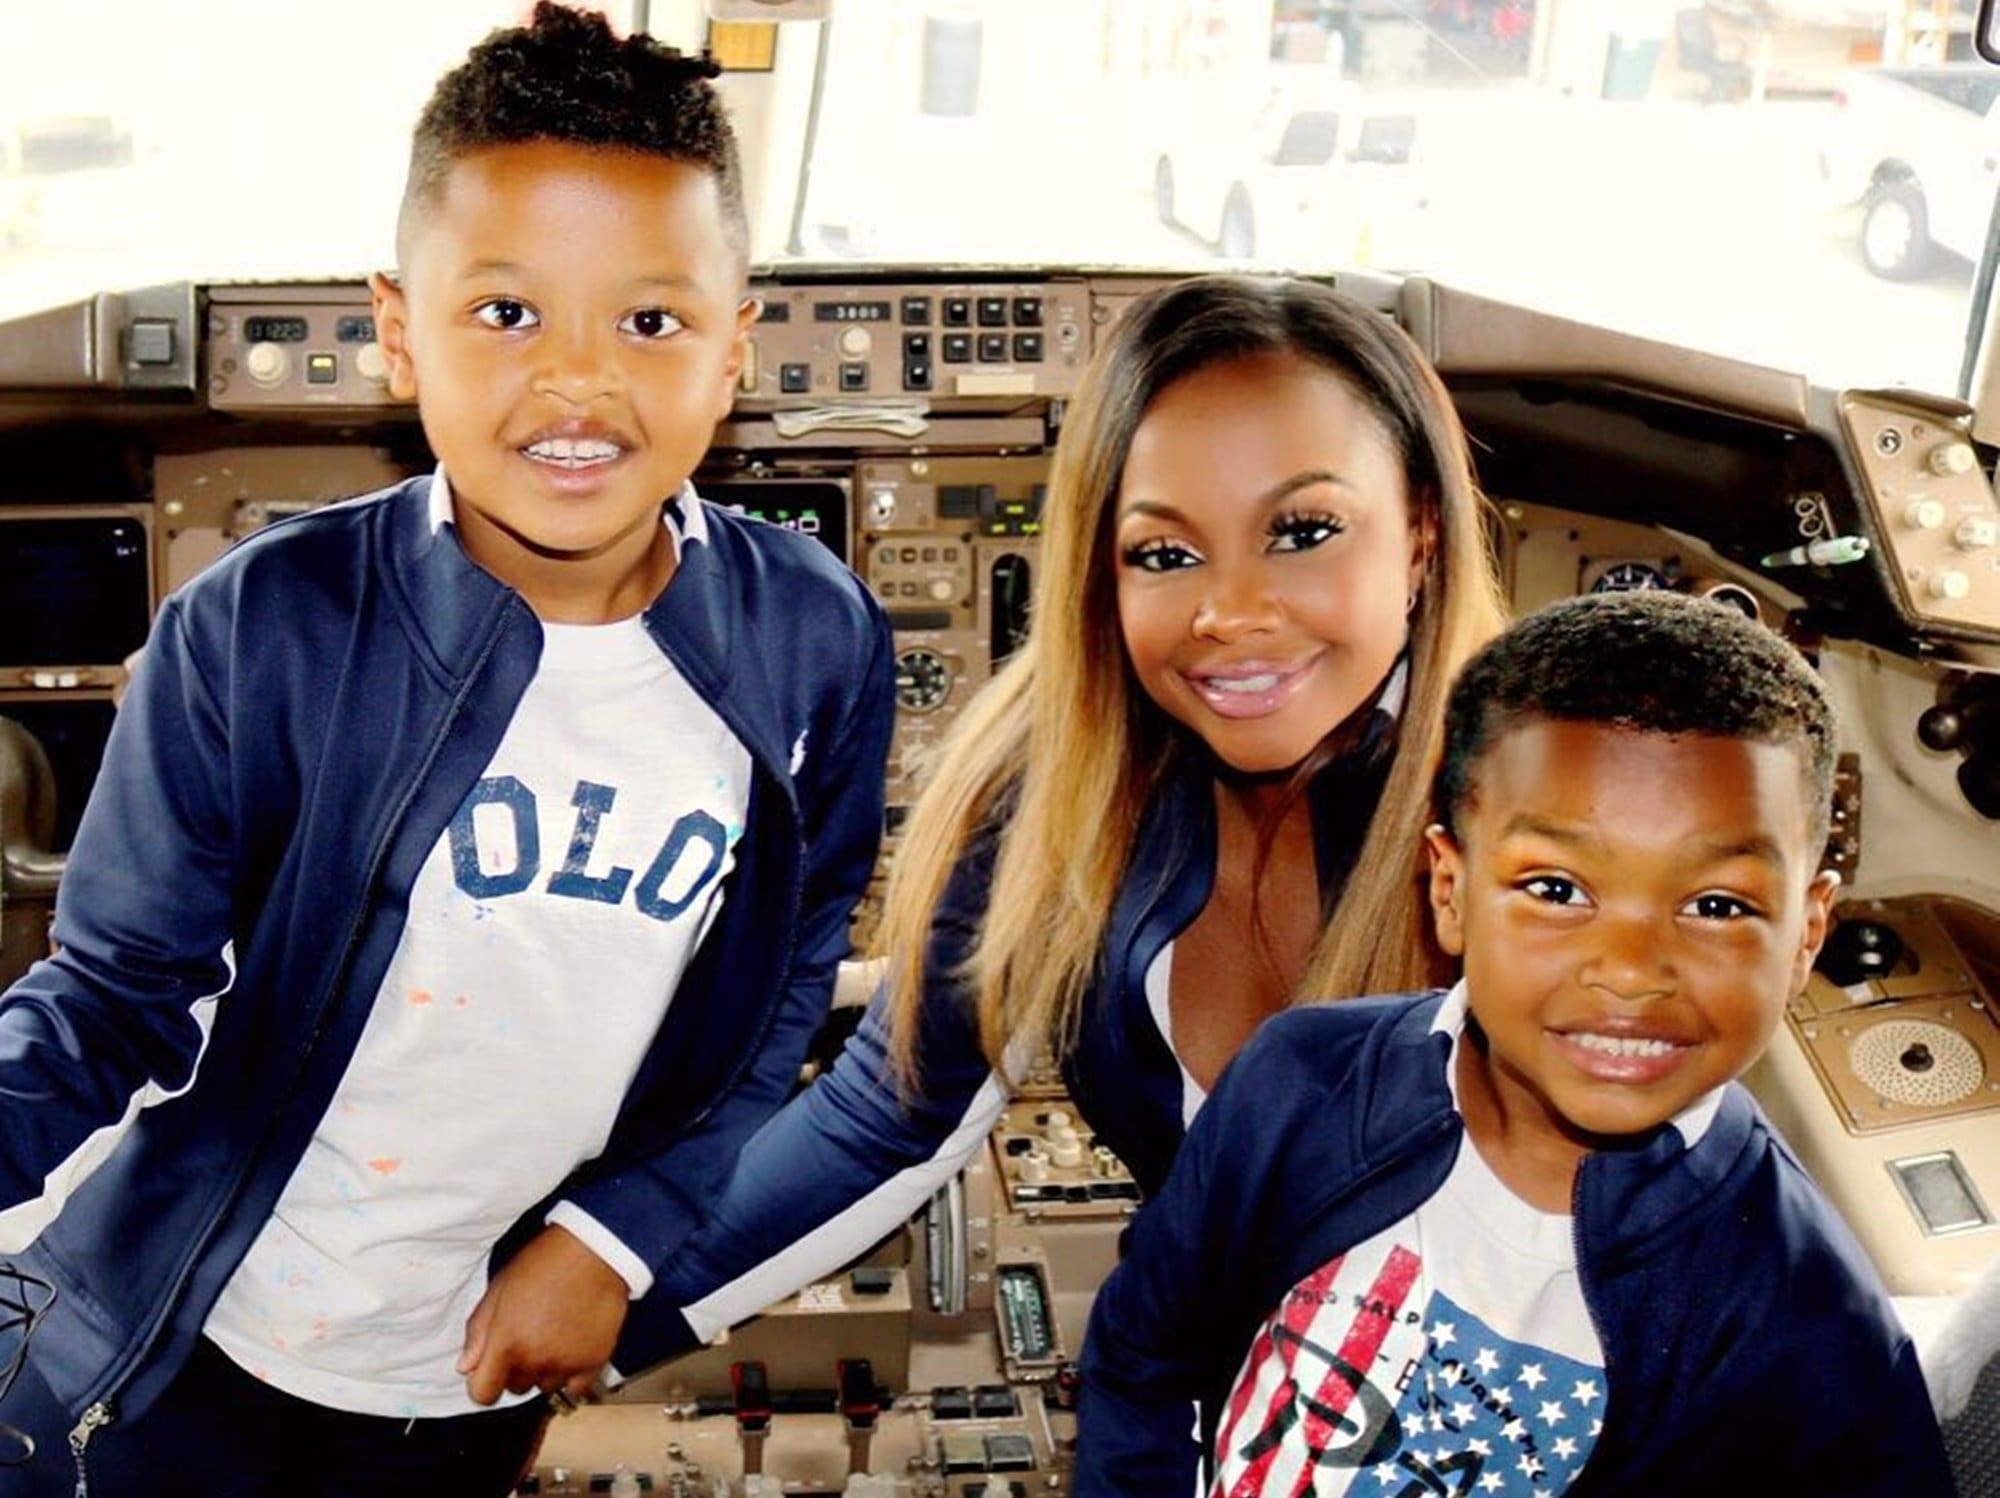 Phaedra Parks' Photo Of Her Son Makes' People's Day And Gives Them Hope For The Best